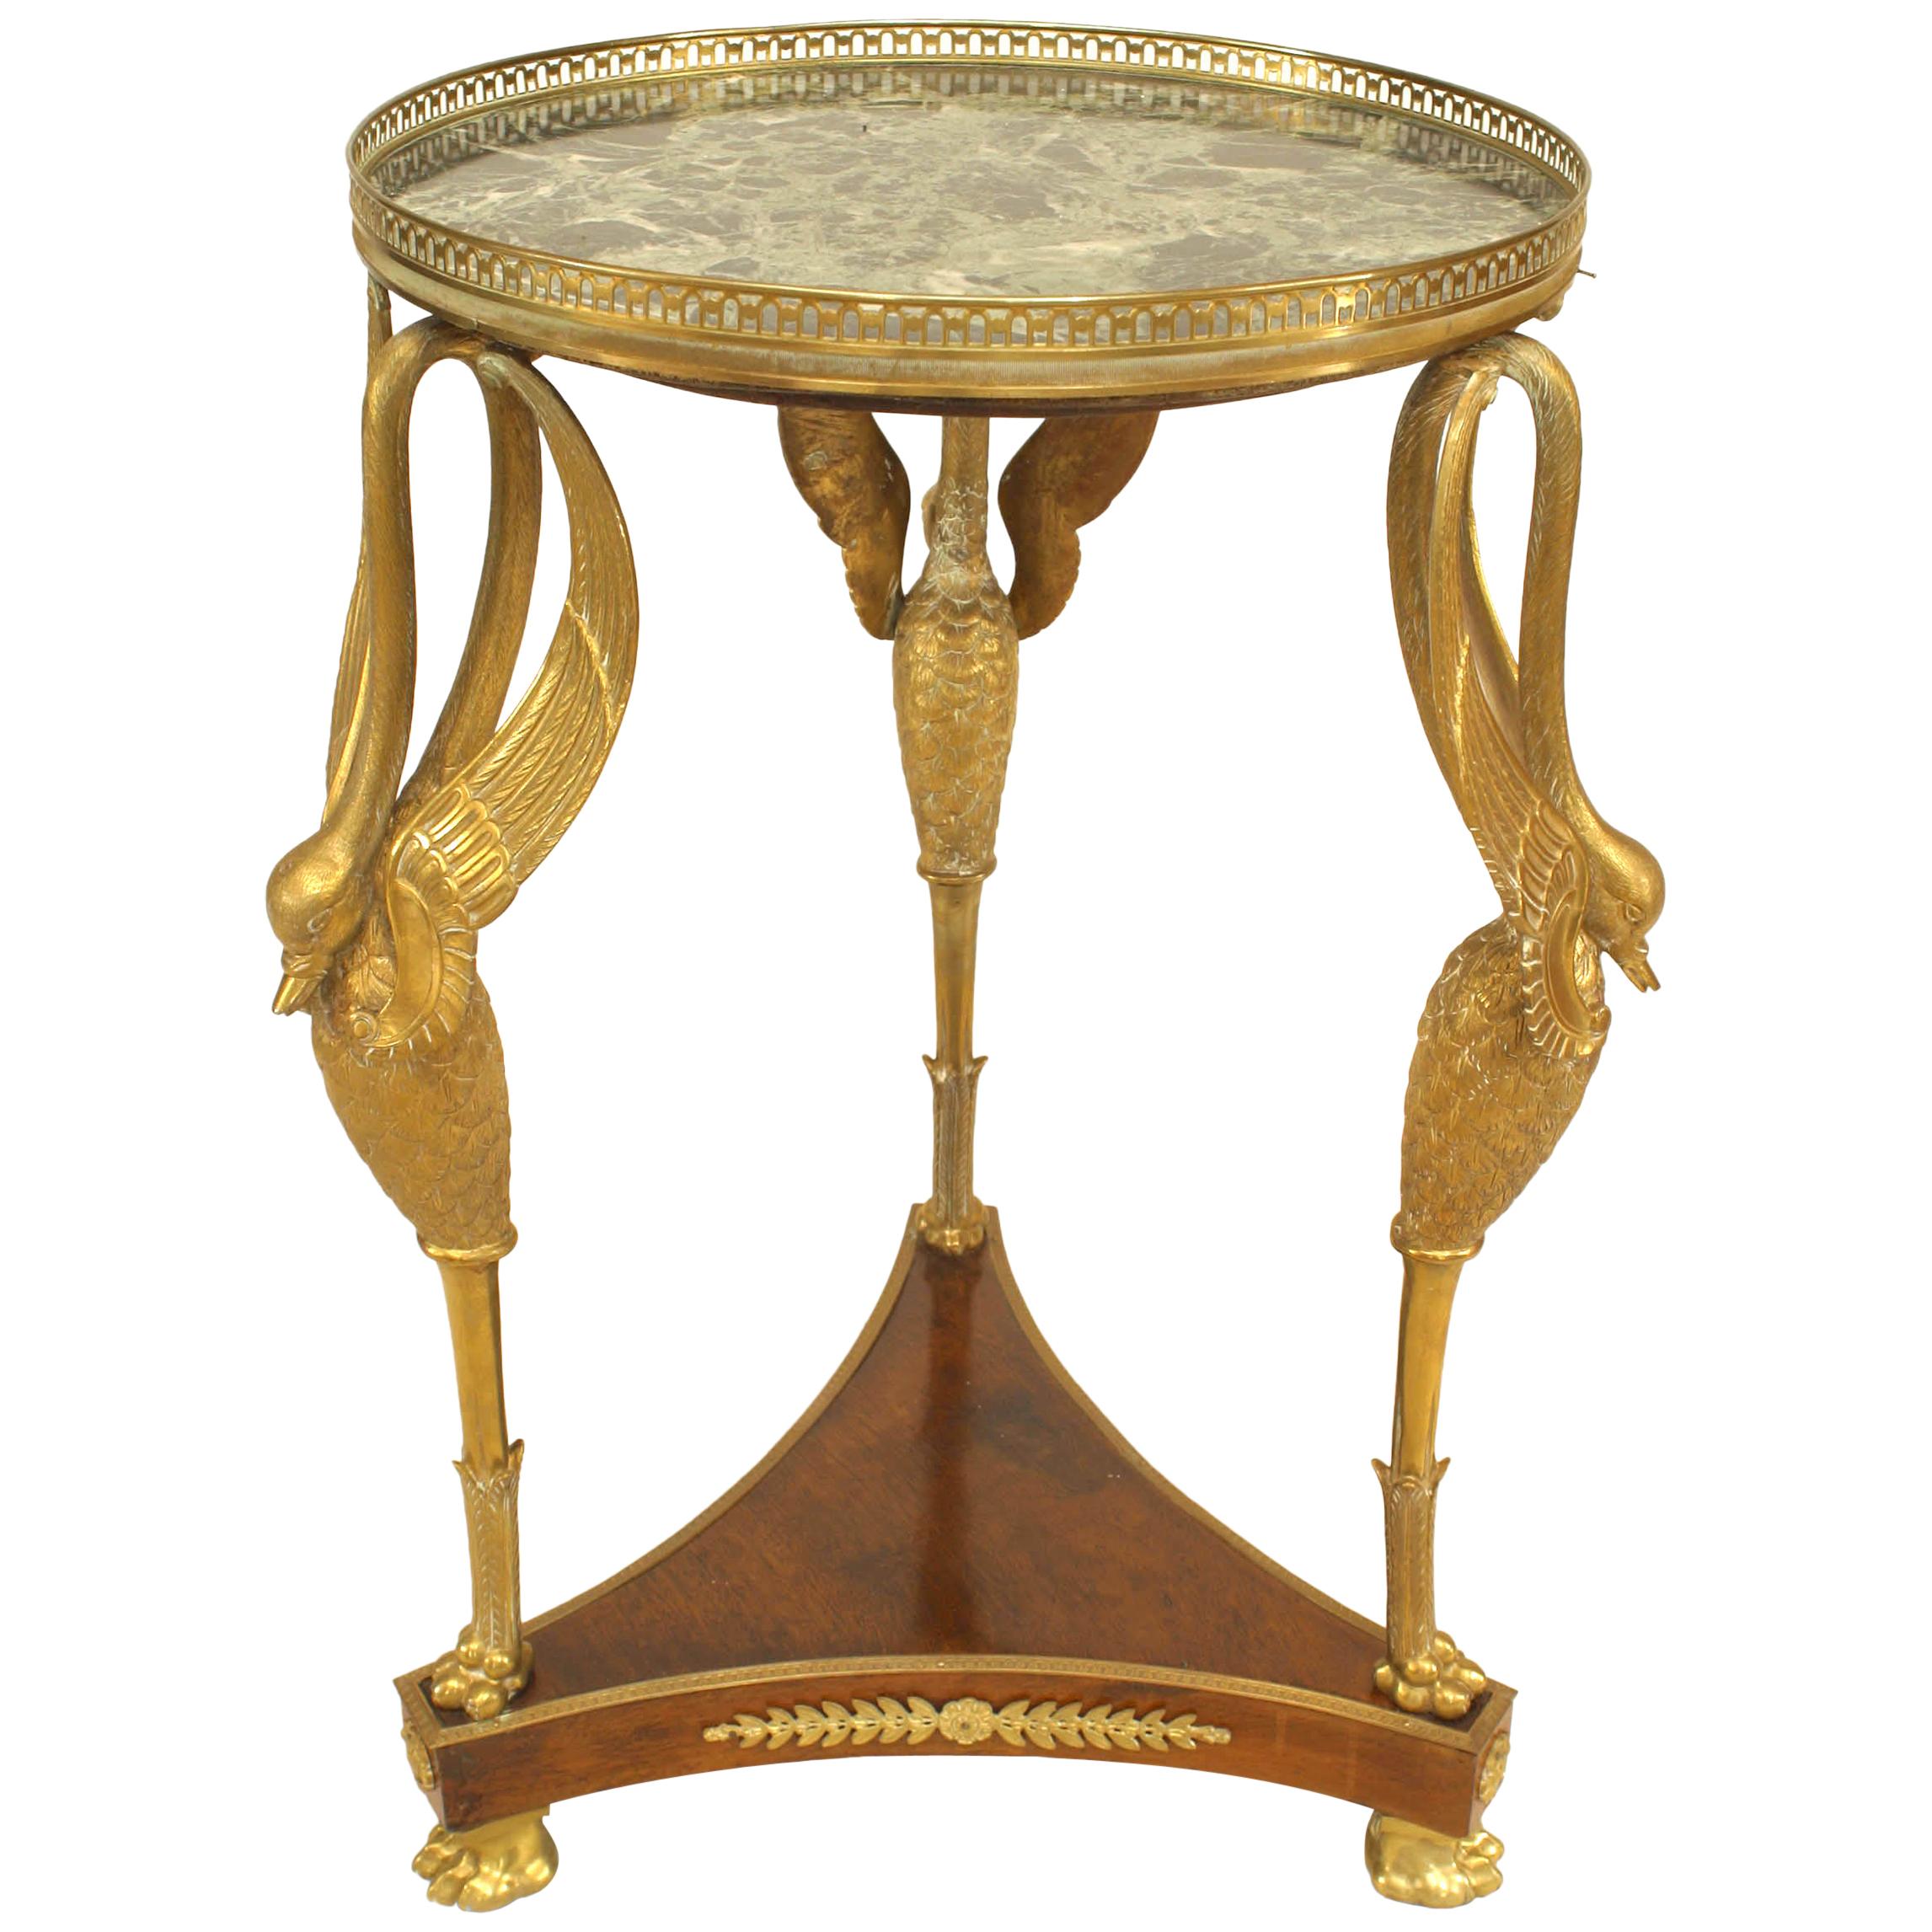 French Empire Gu√©ridon and Marble Table